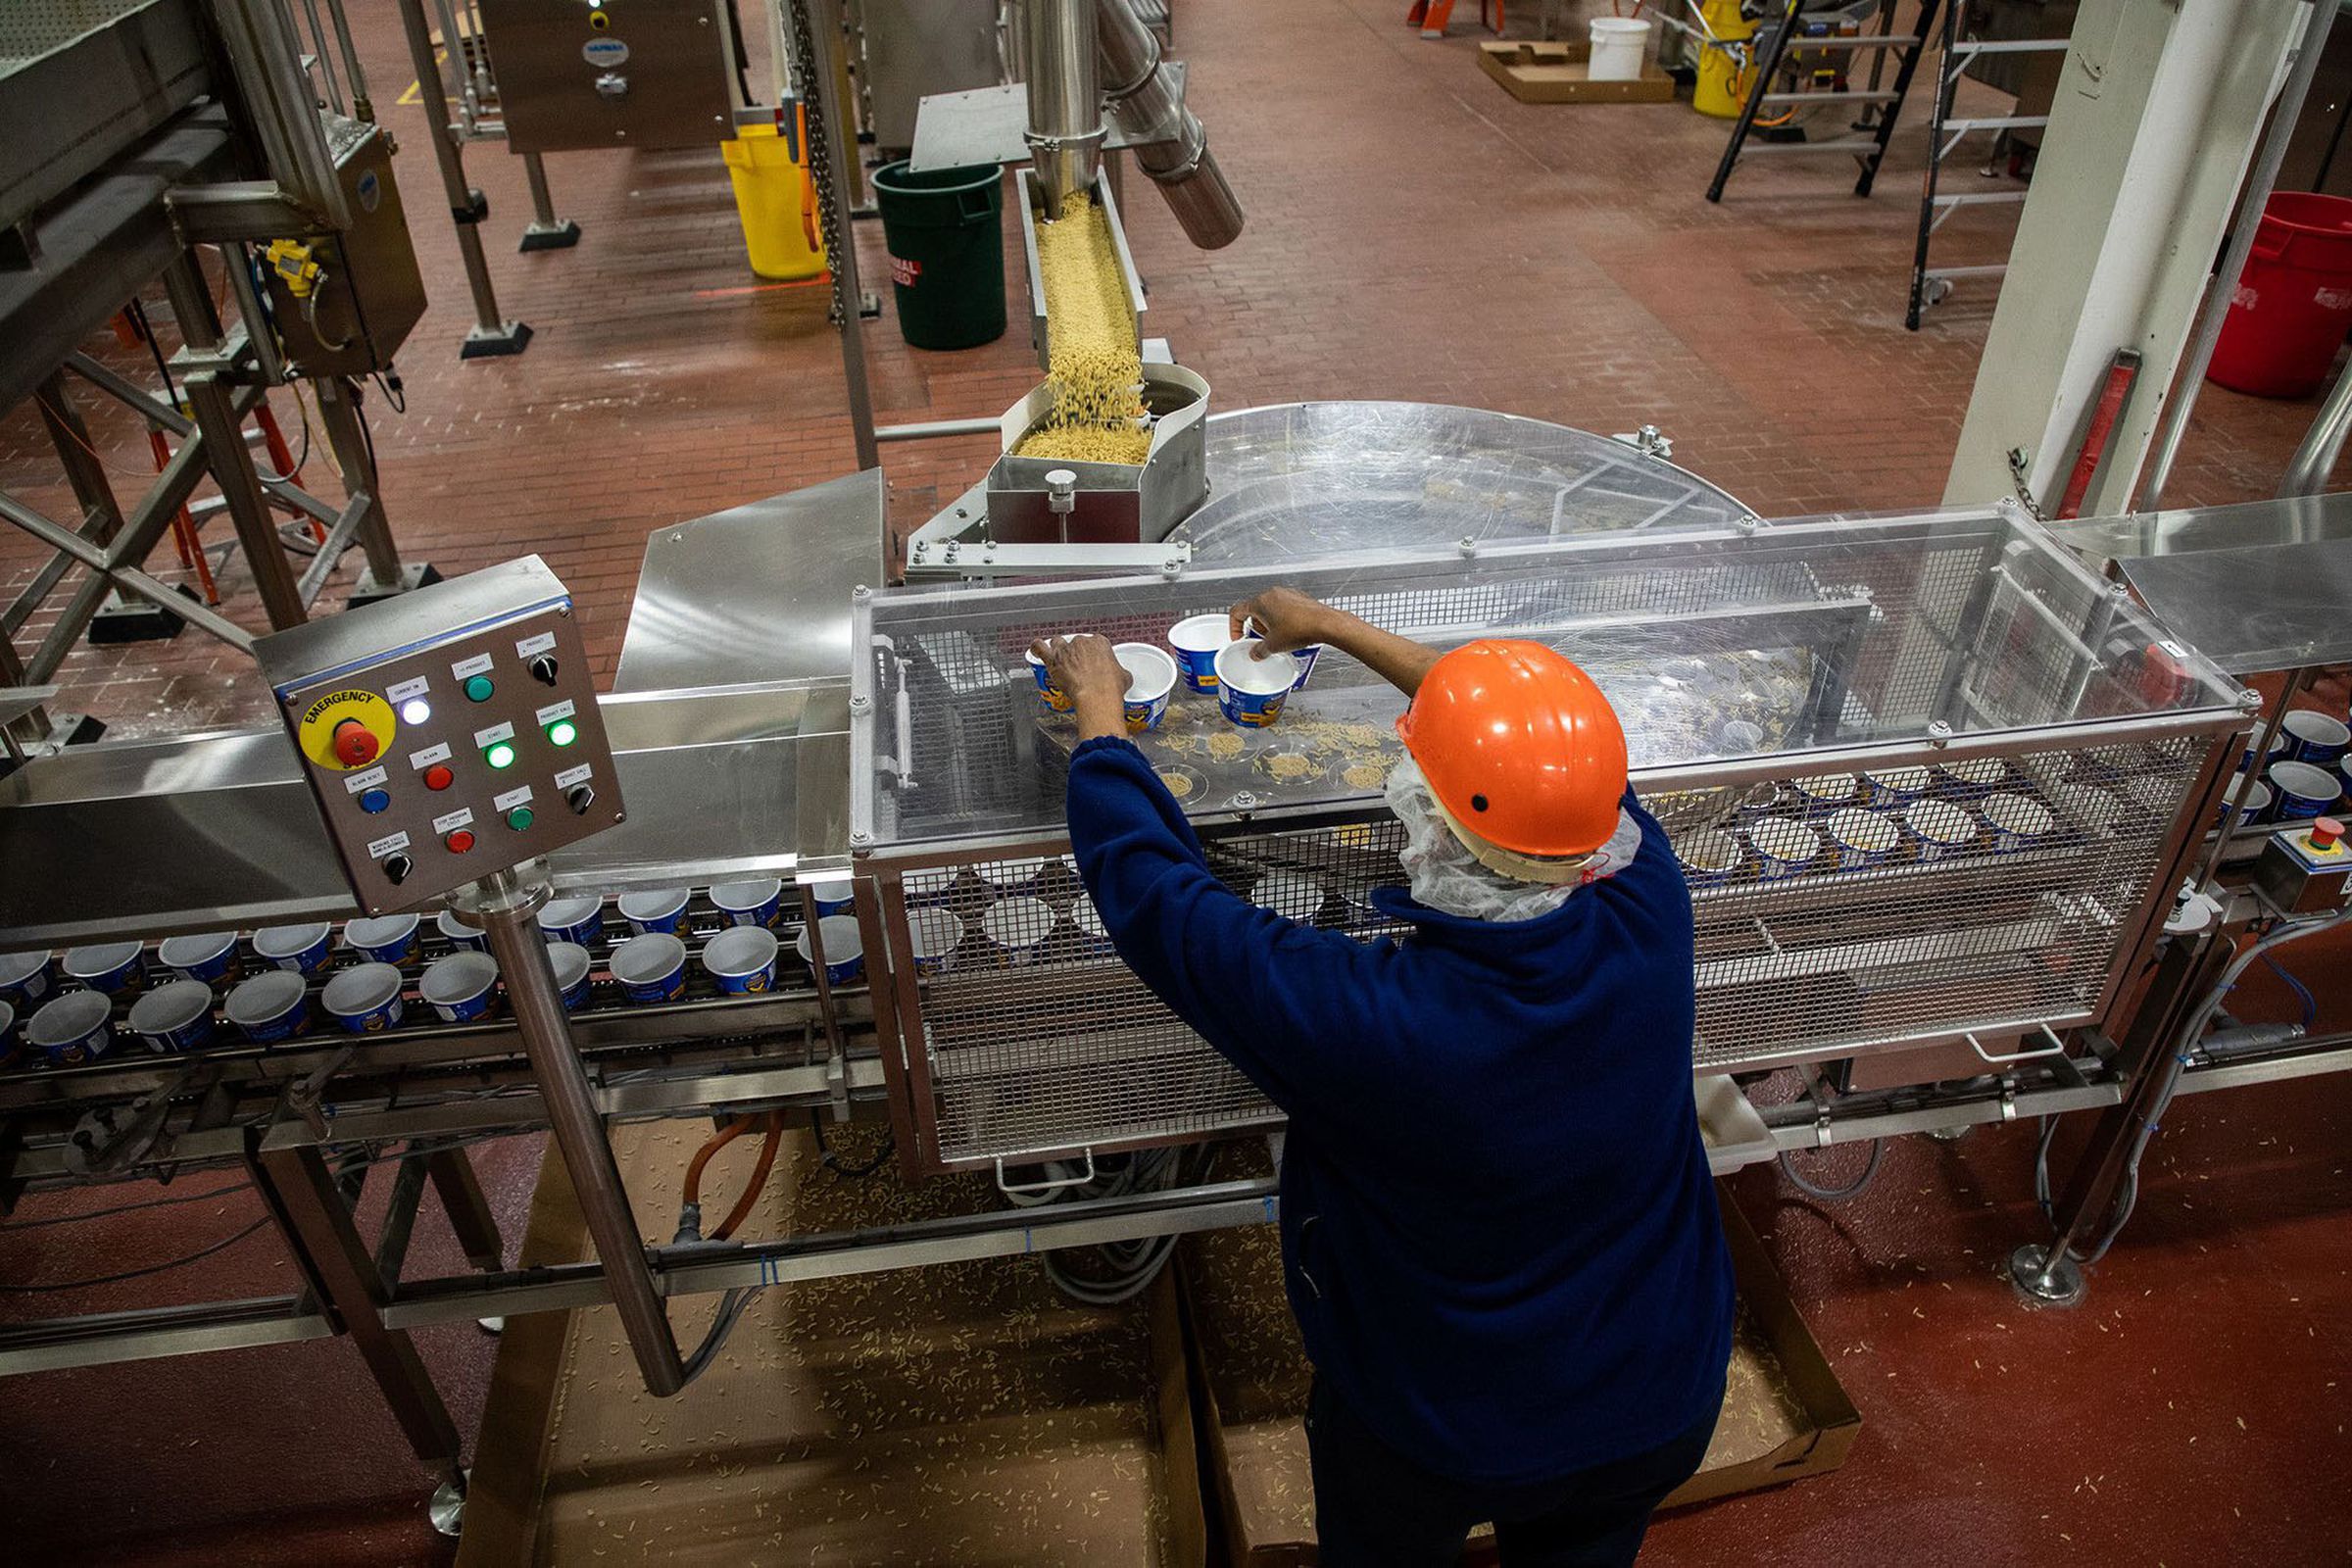 An employee wearing a hard hat and hair net is seen handling cup packaging on a macaroni production line.